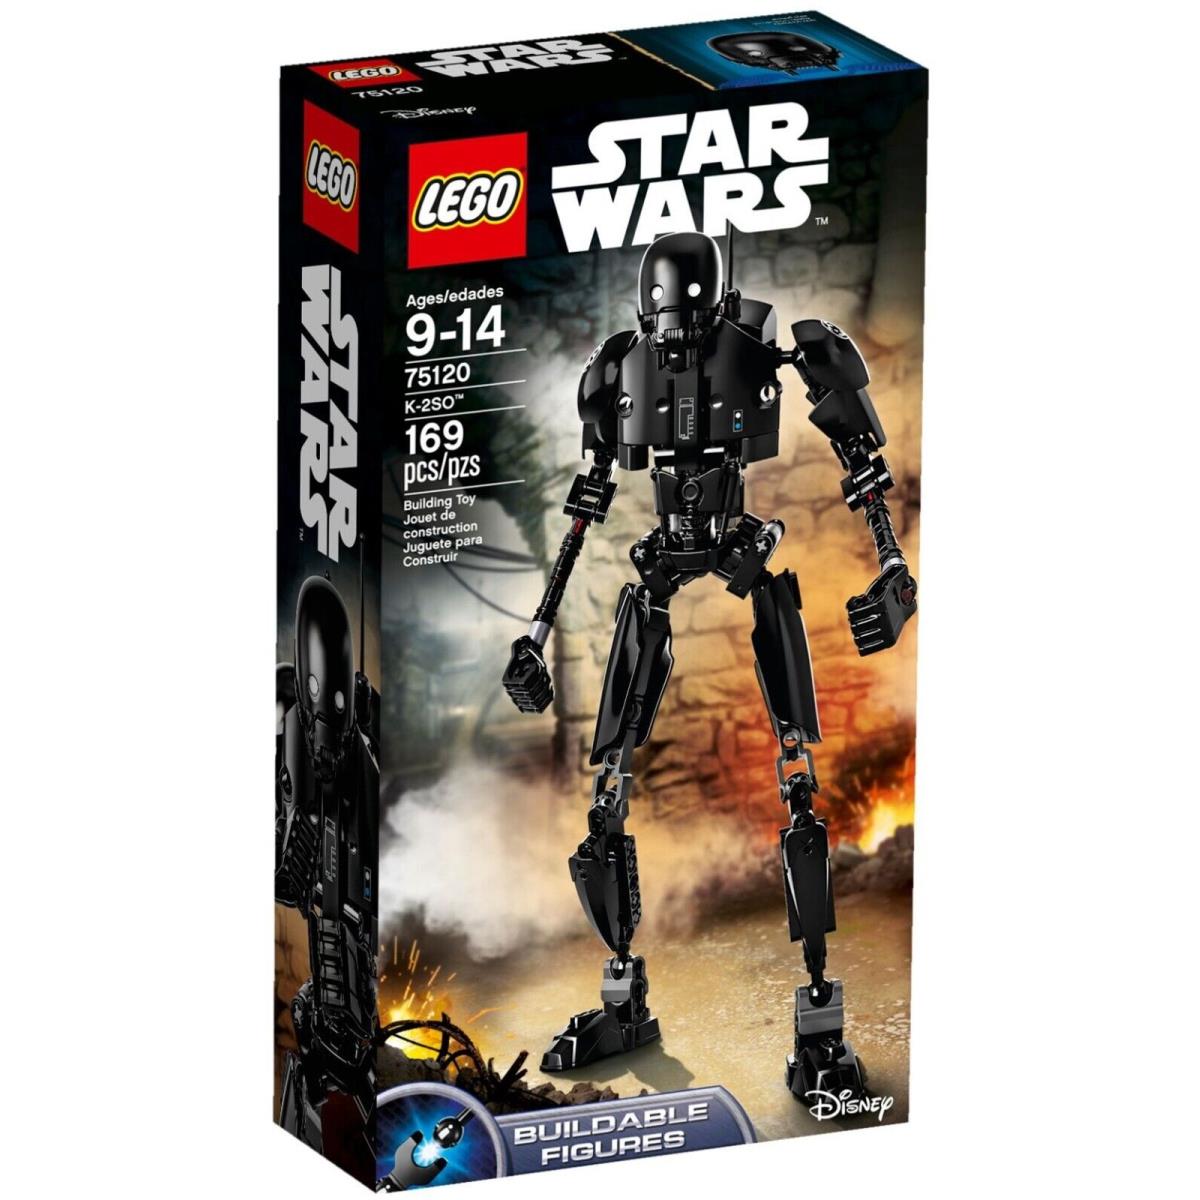 Lego Star Wars Buildable Figures 75120 - K-2SO